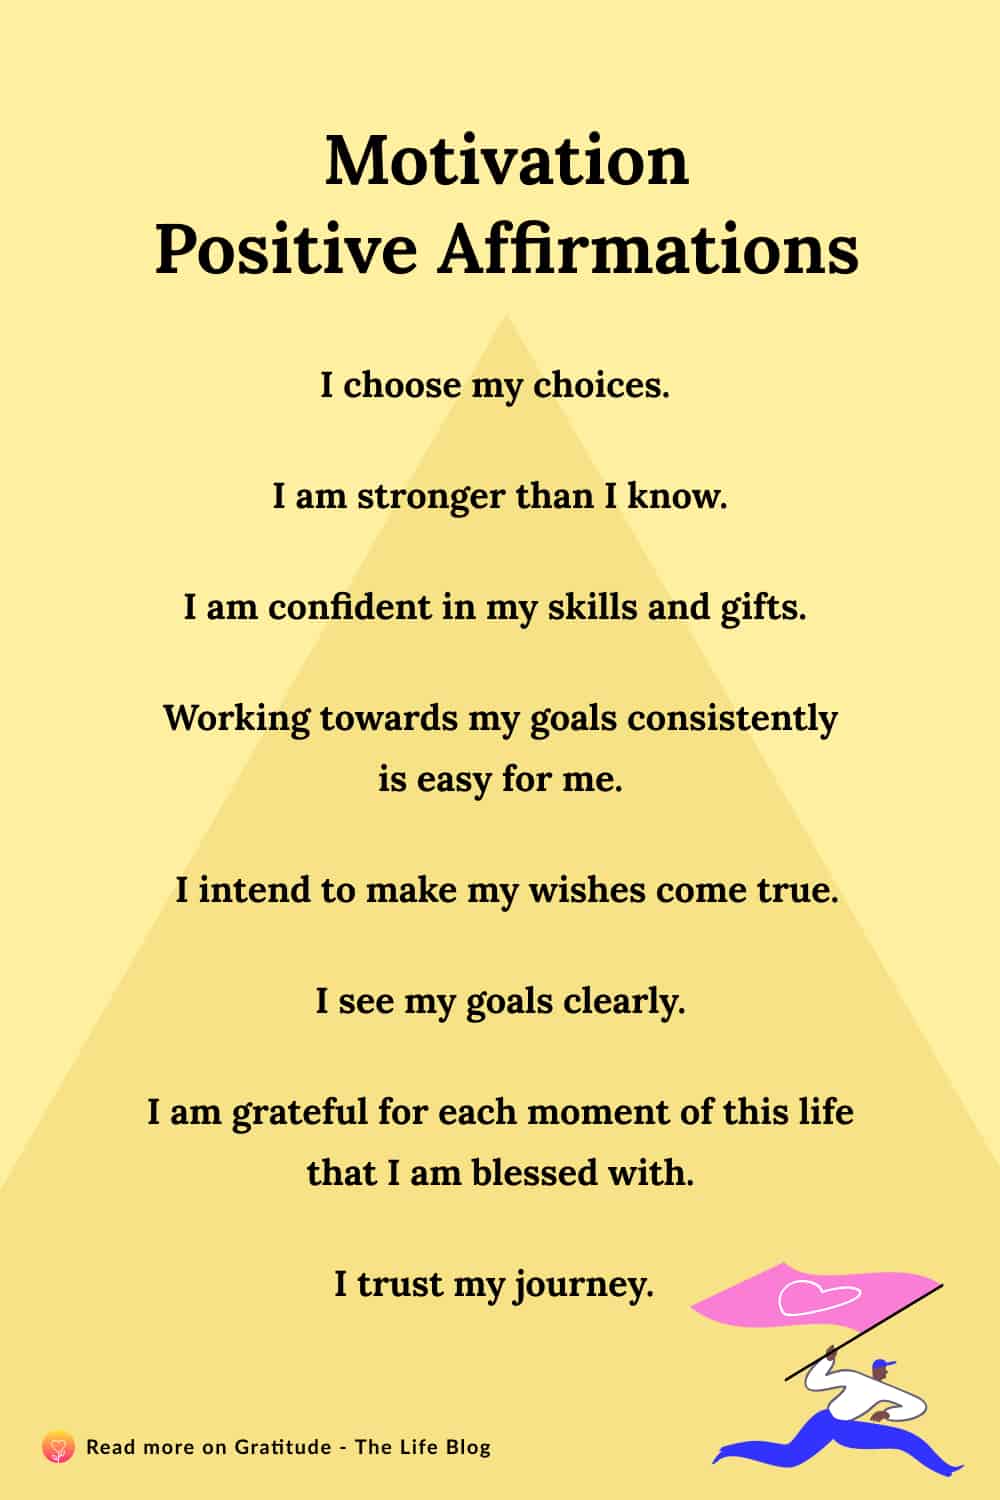 100-motivation-affirmations-to-achieve-your-dreams